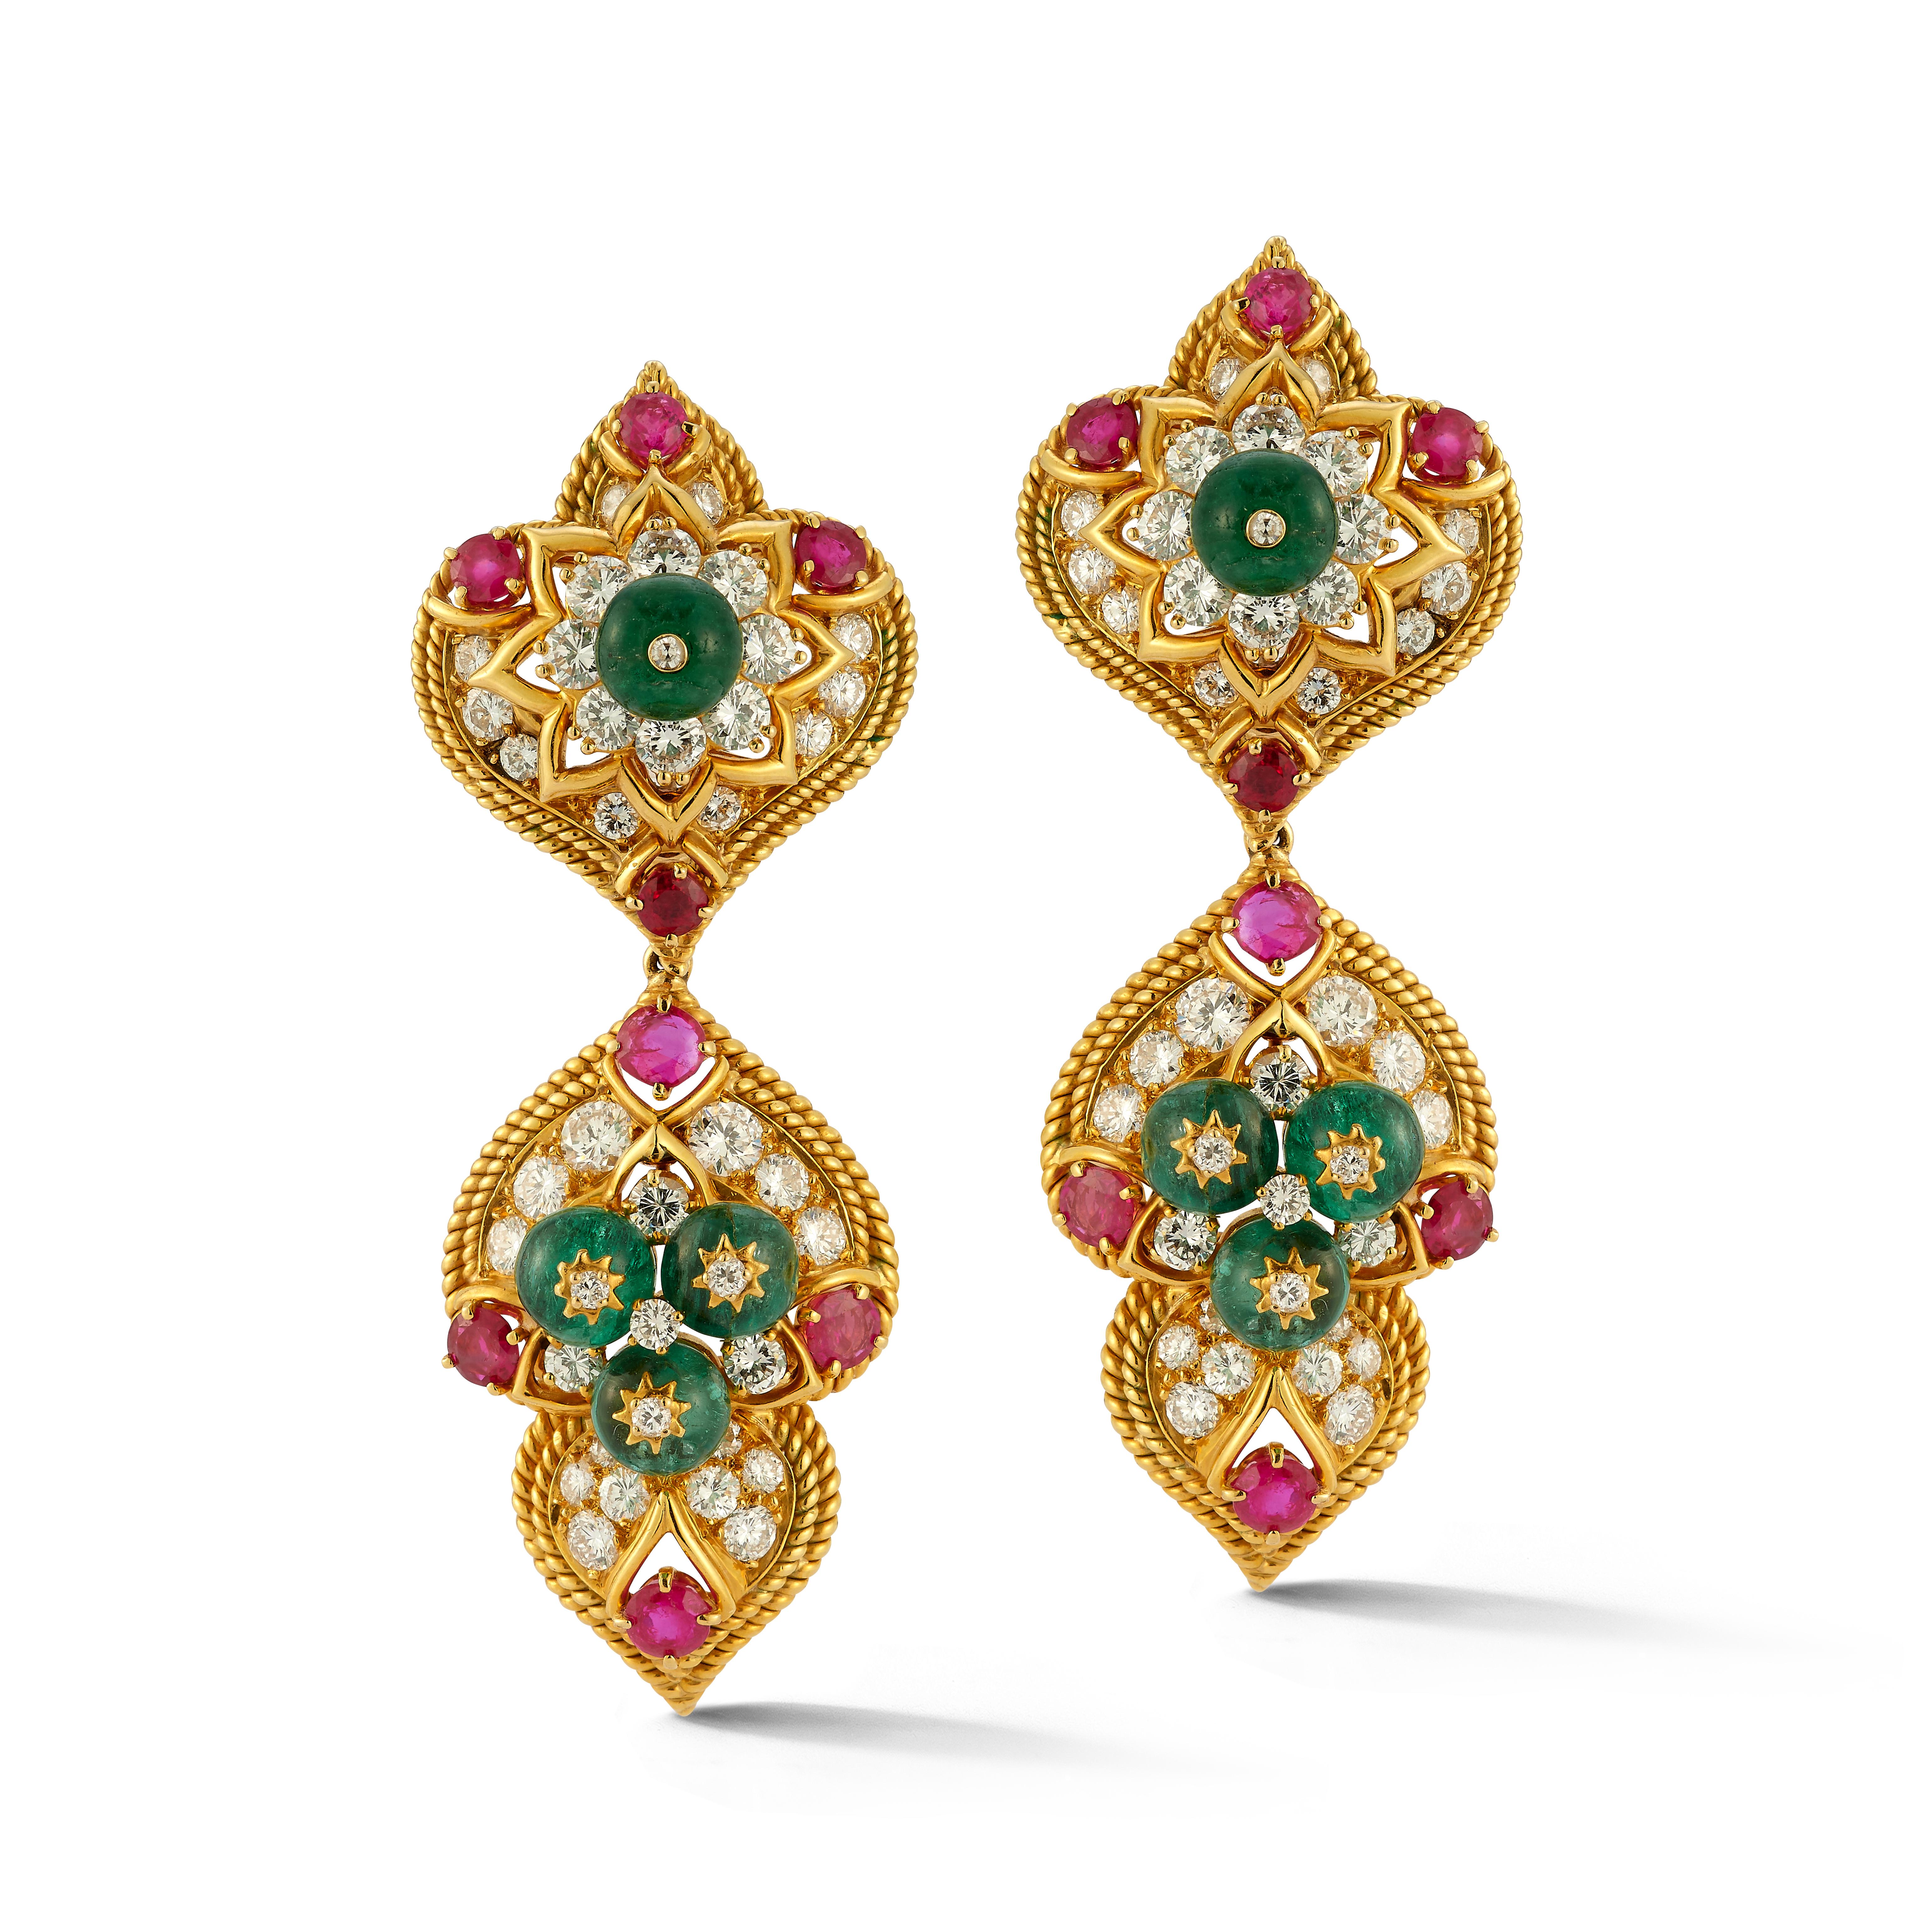 Van Cleef & Arpels Indian Inspired Day & Night Earrings

A pair of 18 karat yellow gold earrings set with 80 round cut diamonds, 16 round cut rubies, and 8 emerald beads

Signed Van Cleef & Arpels NY and numbered

Approximate Diamond Information: